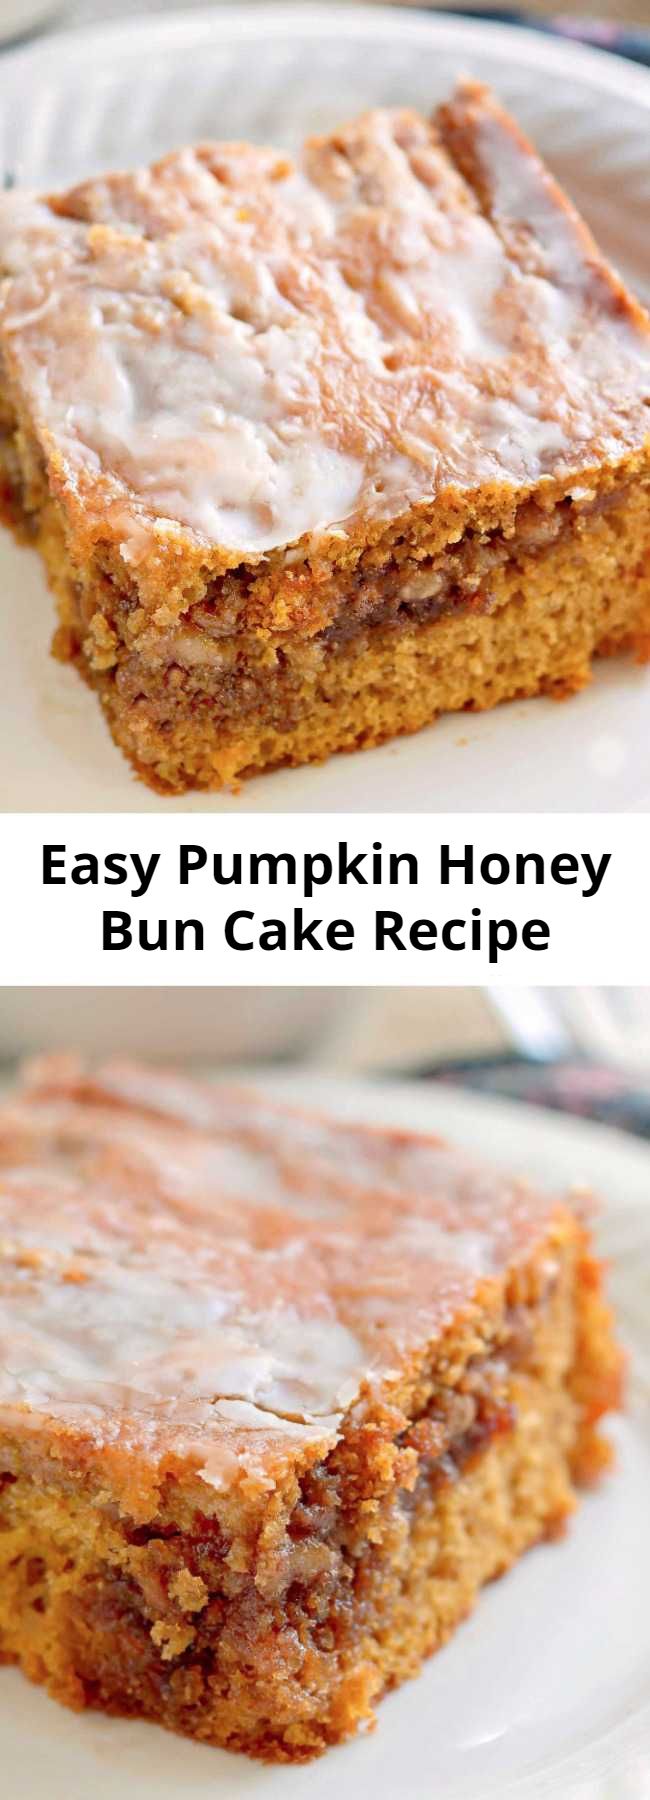 Easy Pumpkin Honey Bun Cake Recipe - A gooey brown sugar and walnut filling in the center of a moist pumpkin cake topped with a simple glaze.